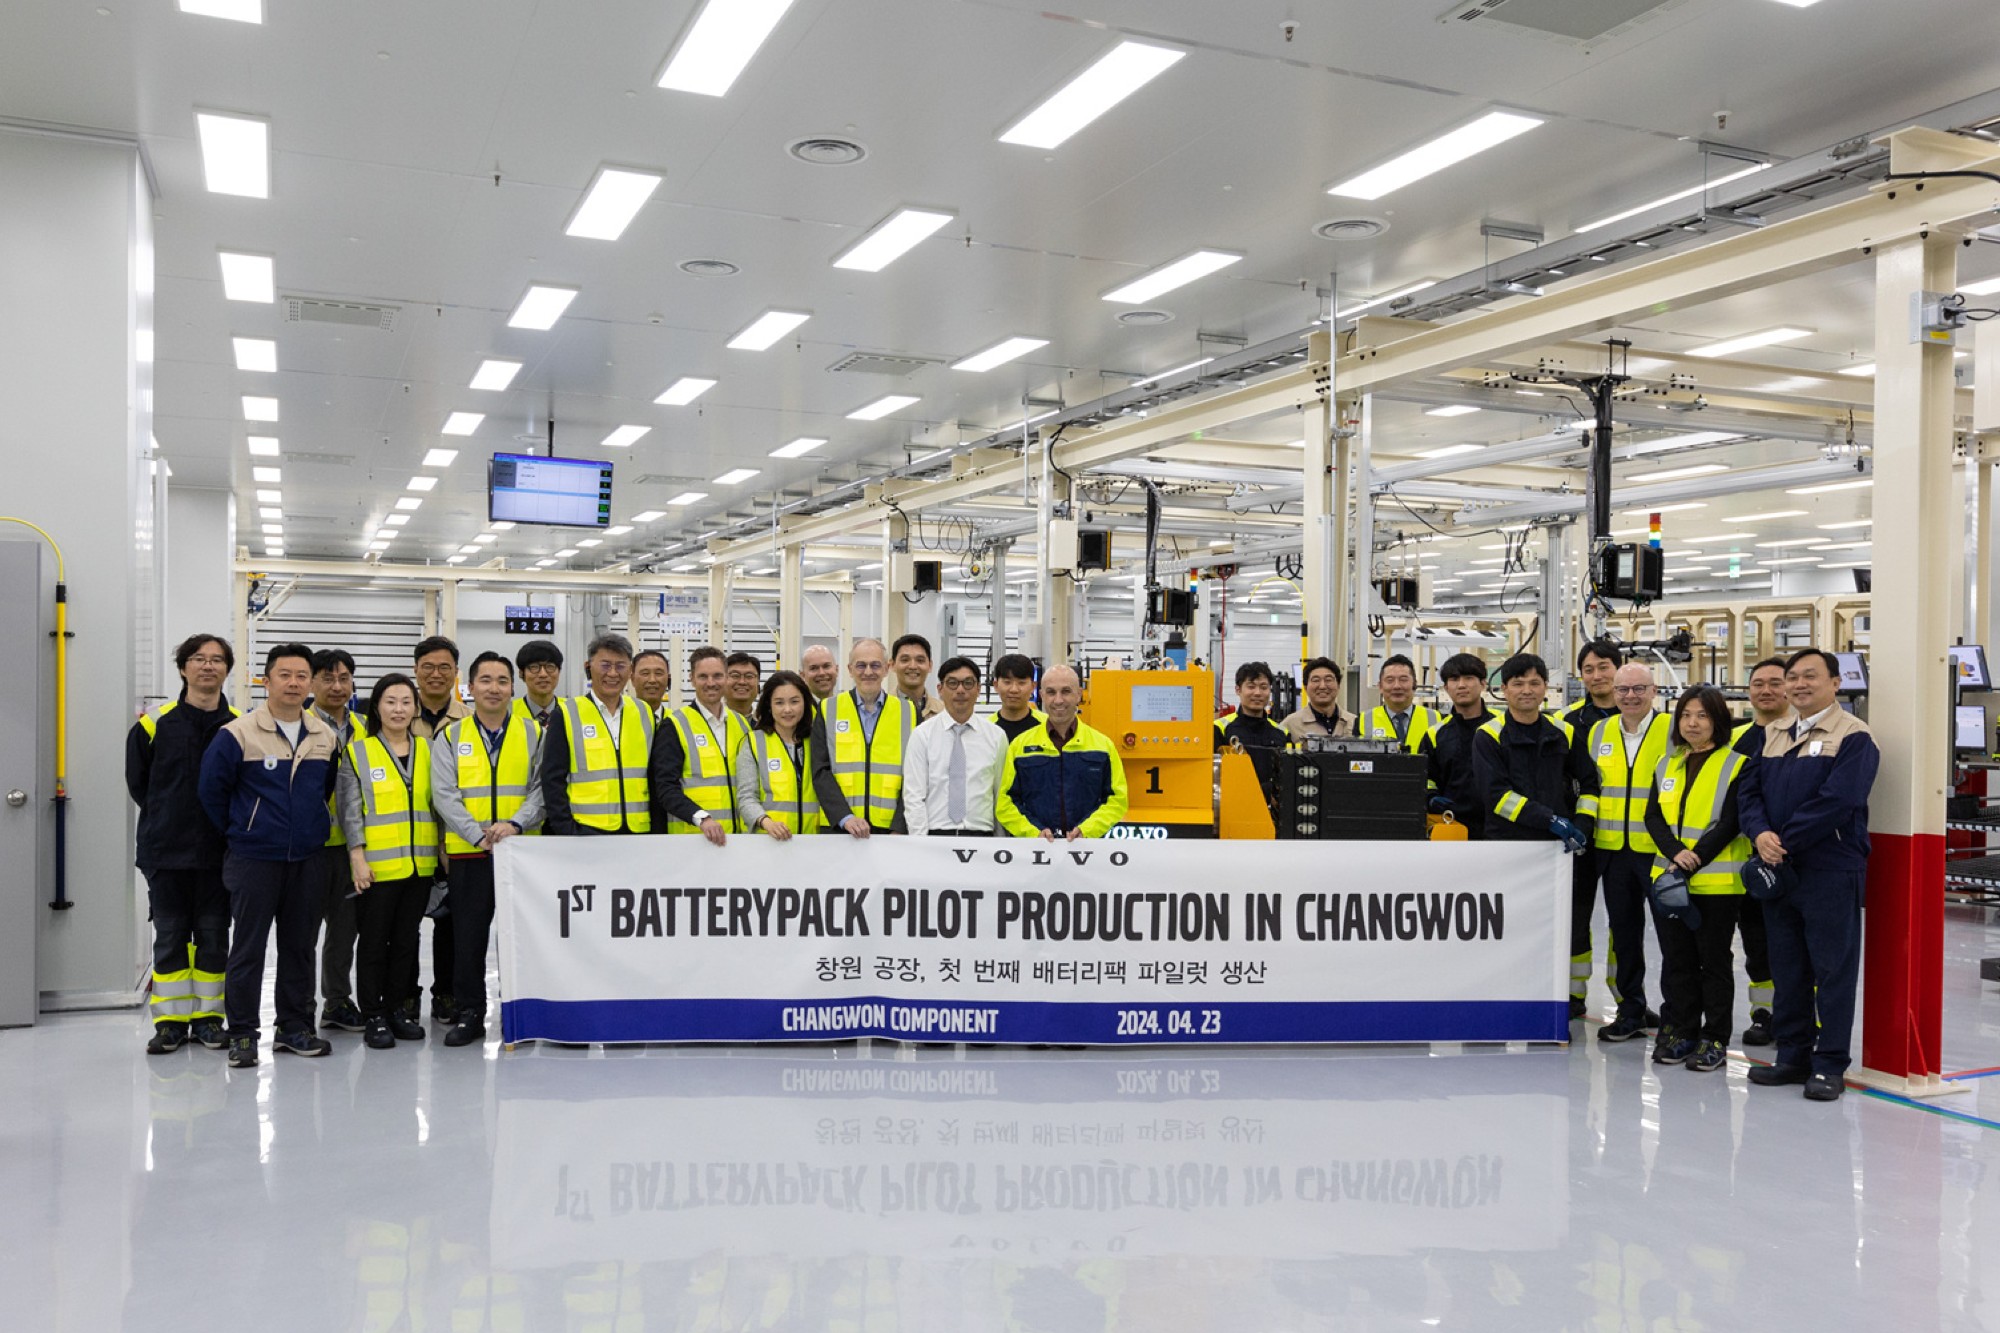 Volvo CE’s new battery pack production facility in Changwon, Korea